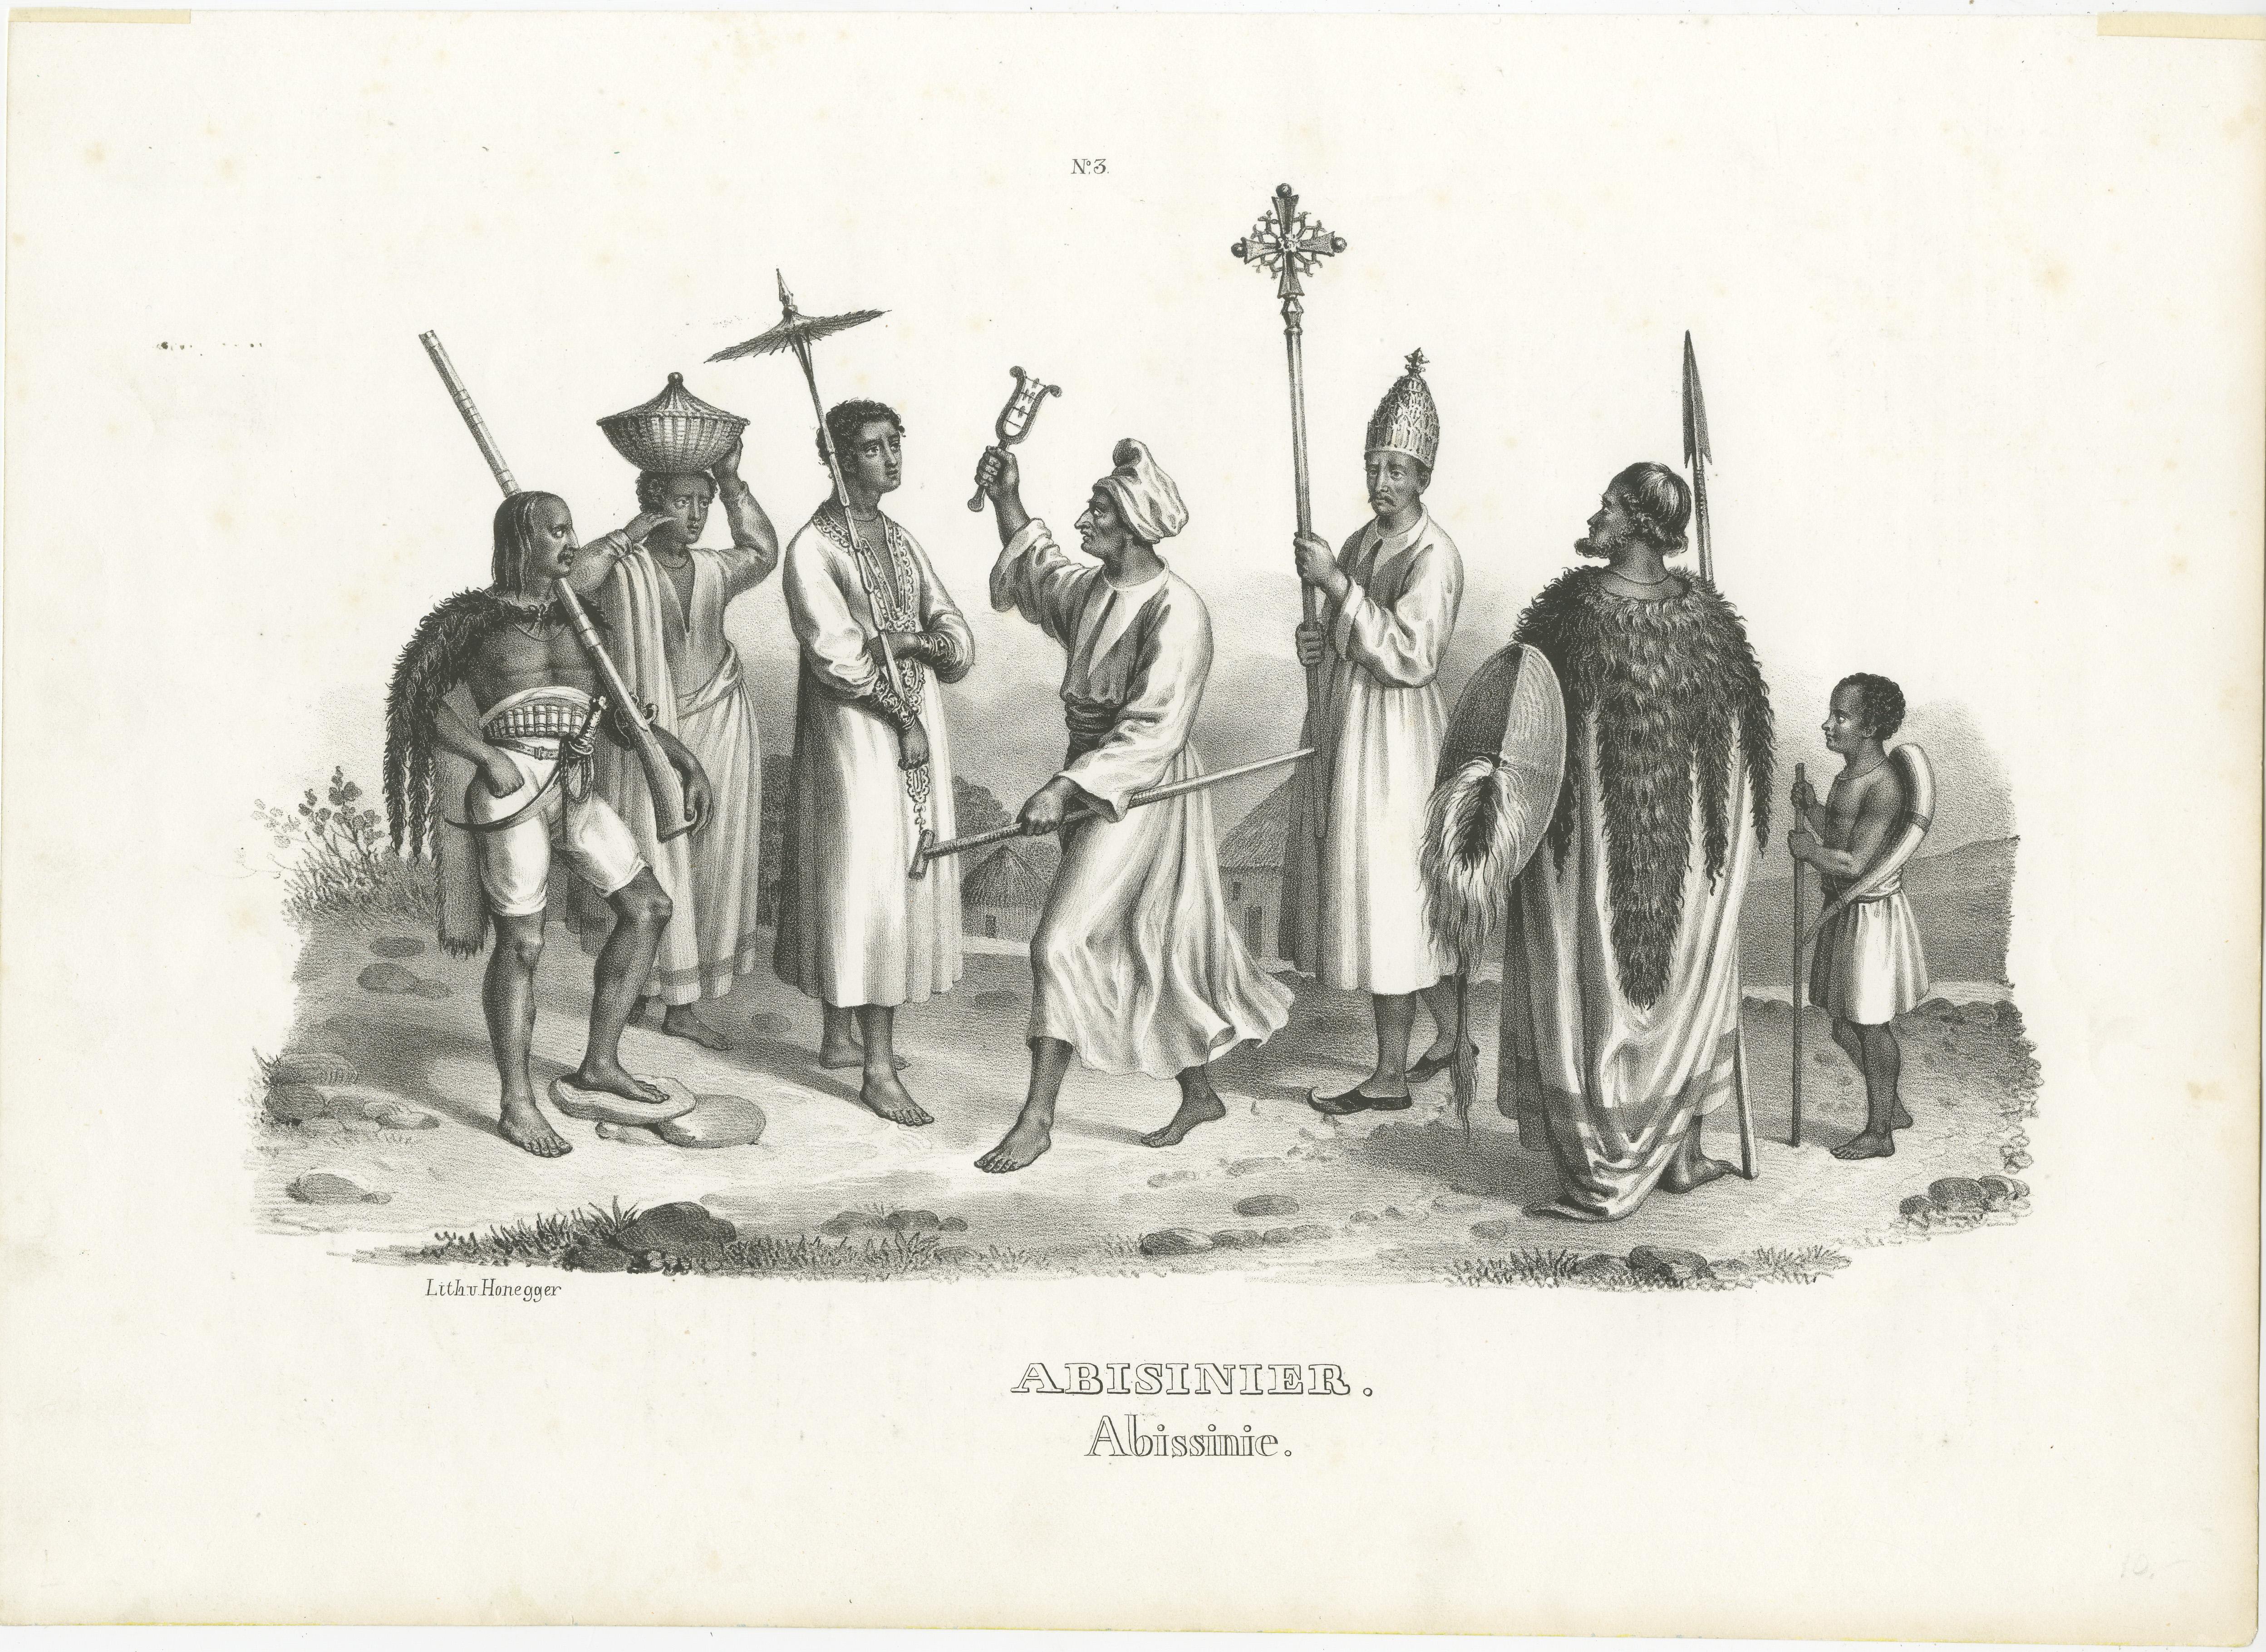 Antique print titled 'Abisinier. Abissinie'. Original antique steel engraving showing natives of Abyssinia, Ethiopia. Lithographed by Honegger. Published circa 1845. Source unknown, to be determined.